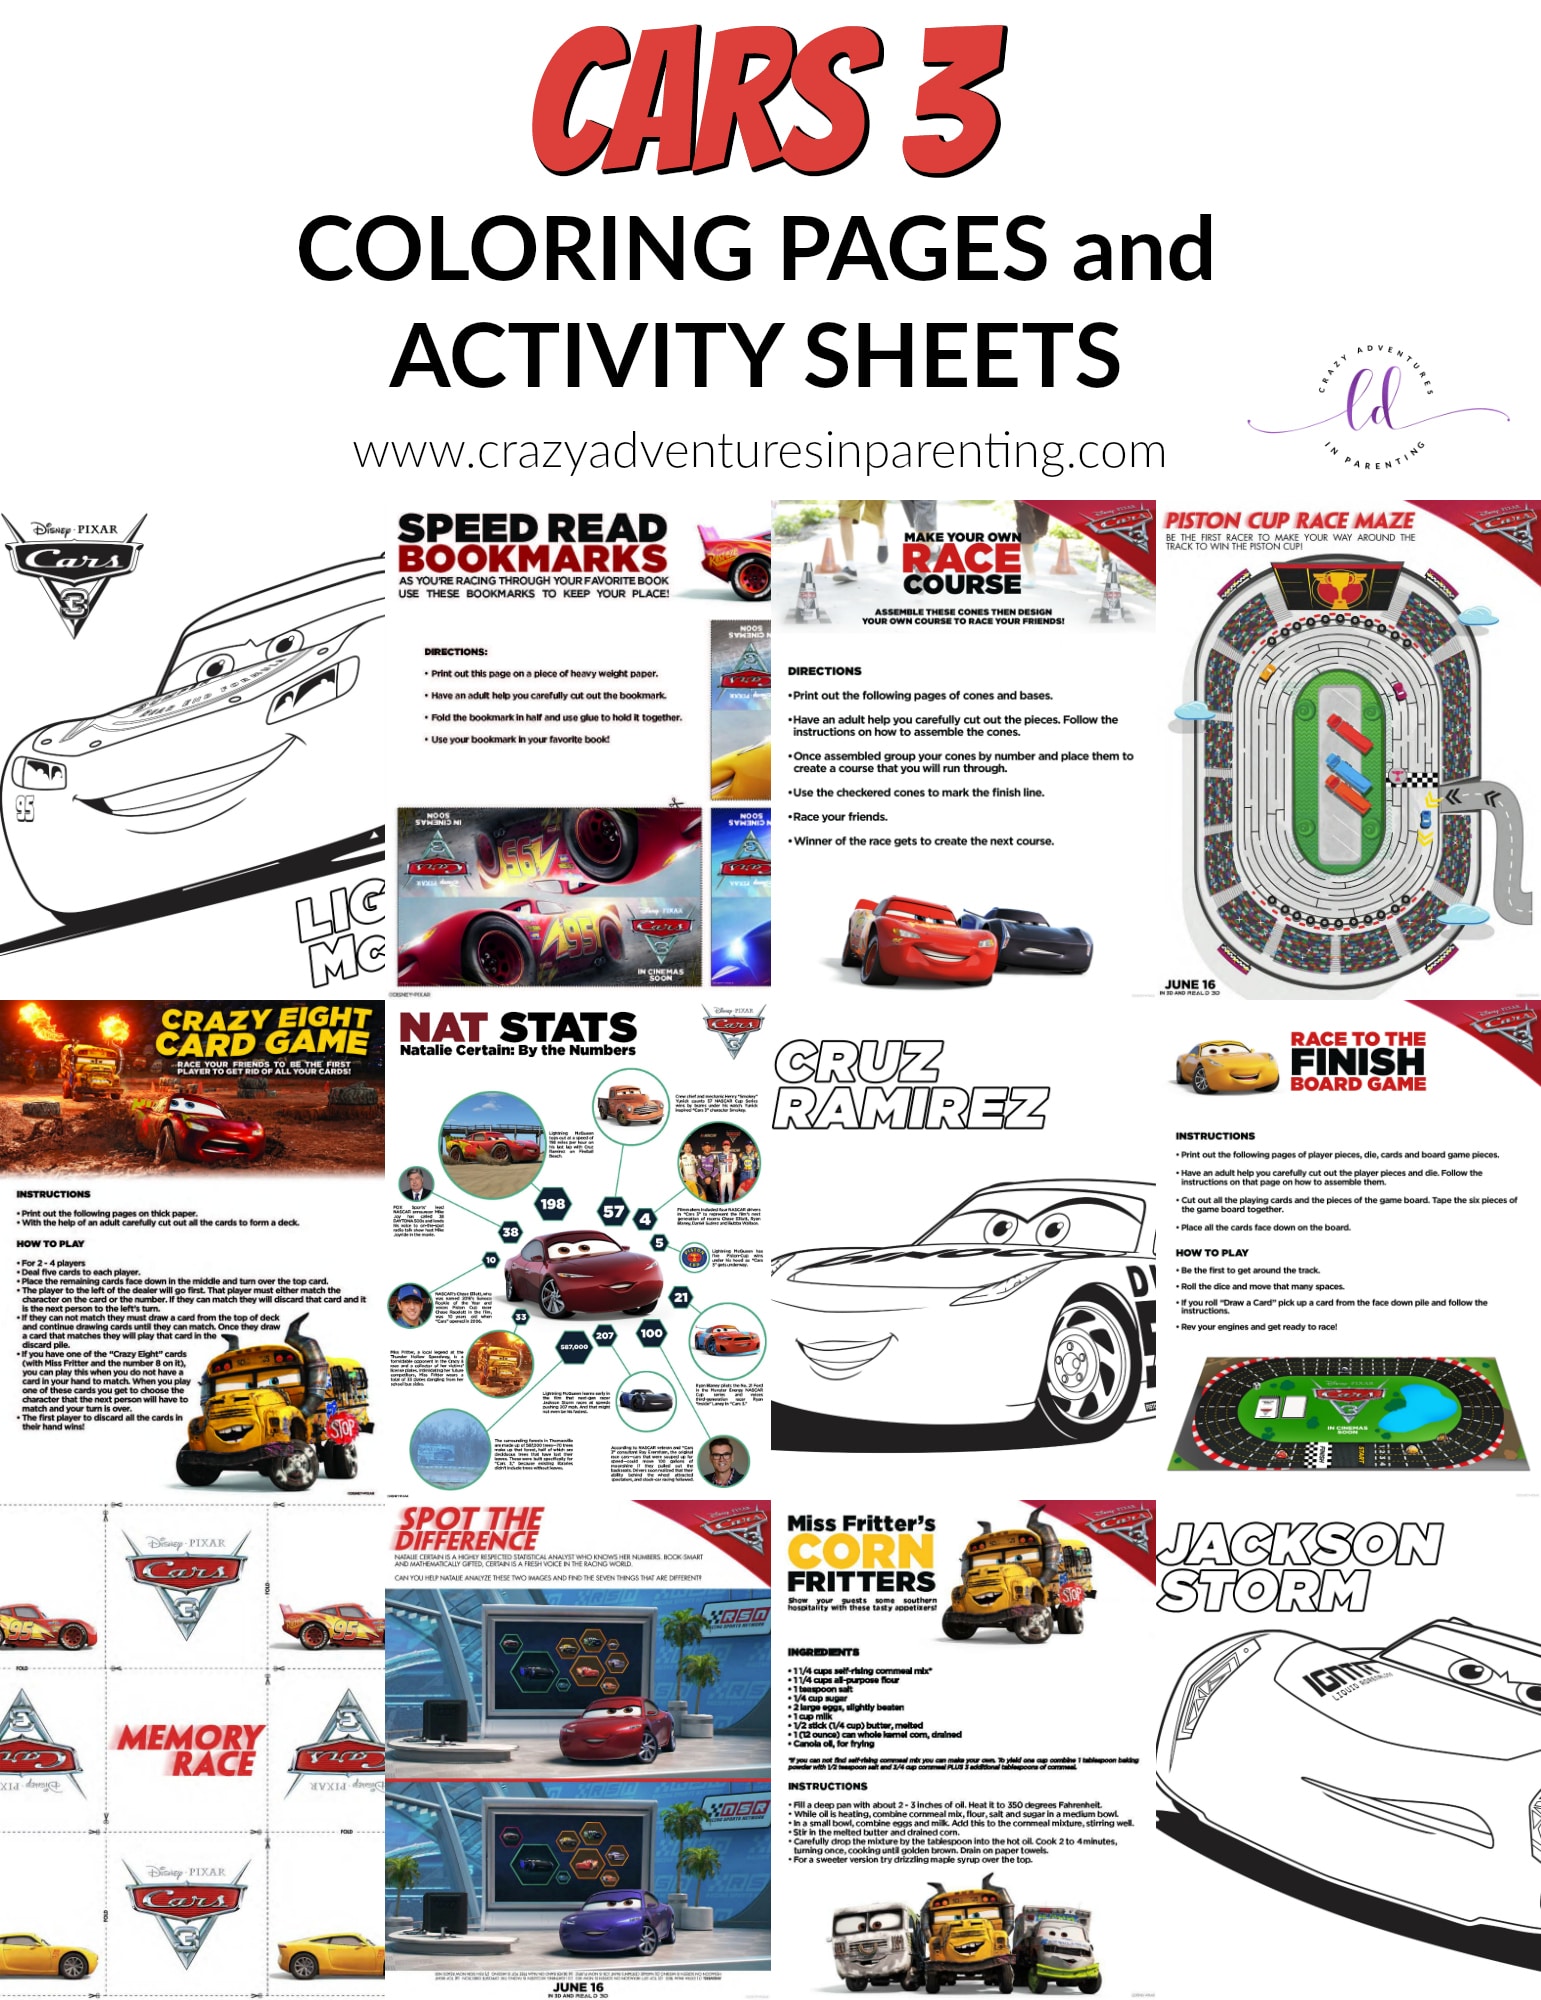 Cars 3 Activity Sheets and Coloring Pages